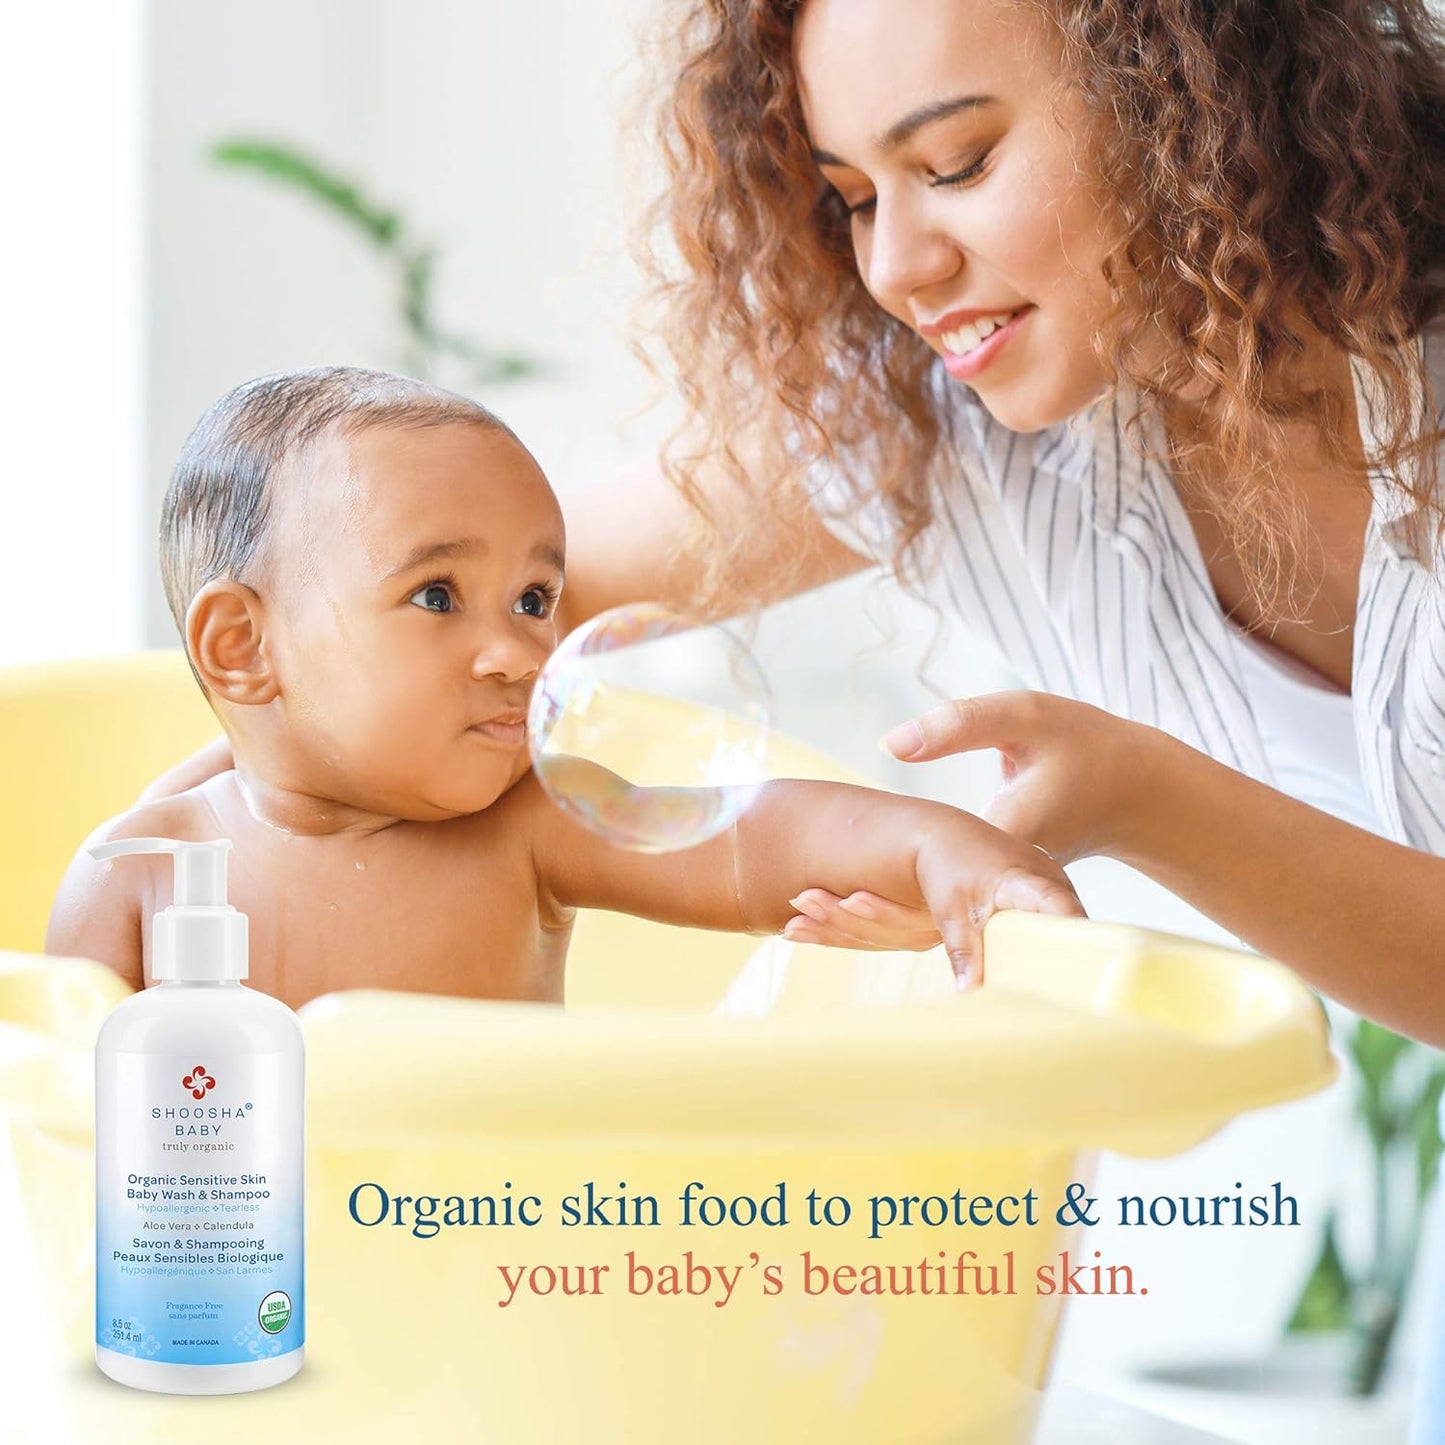 Shoosha USDA certified Organic Shampoo and Body Wash for babies and kids, Great for Sensitive Skin, All natural made from food grade ingredients, Fragrance and Tear Free, Hypoallergenic